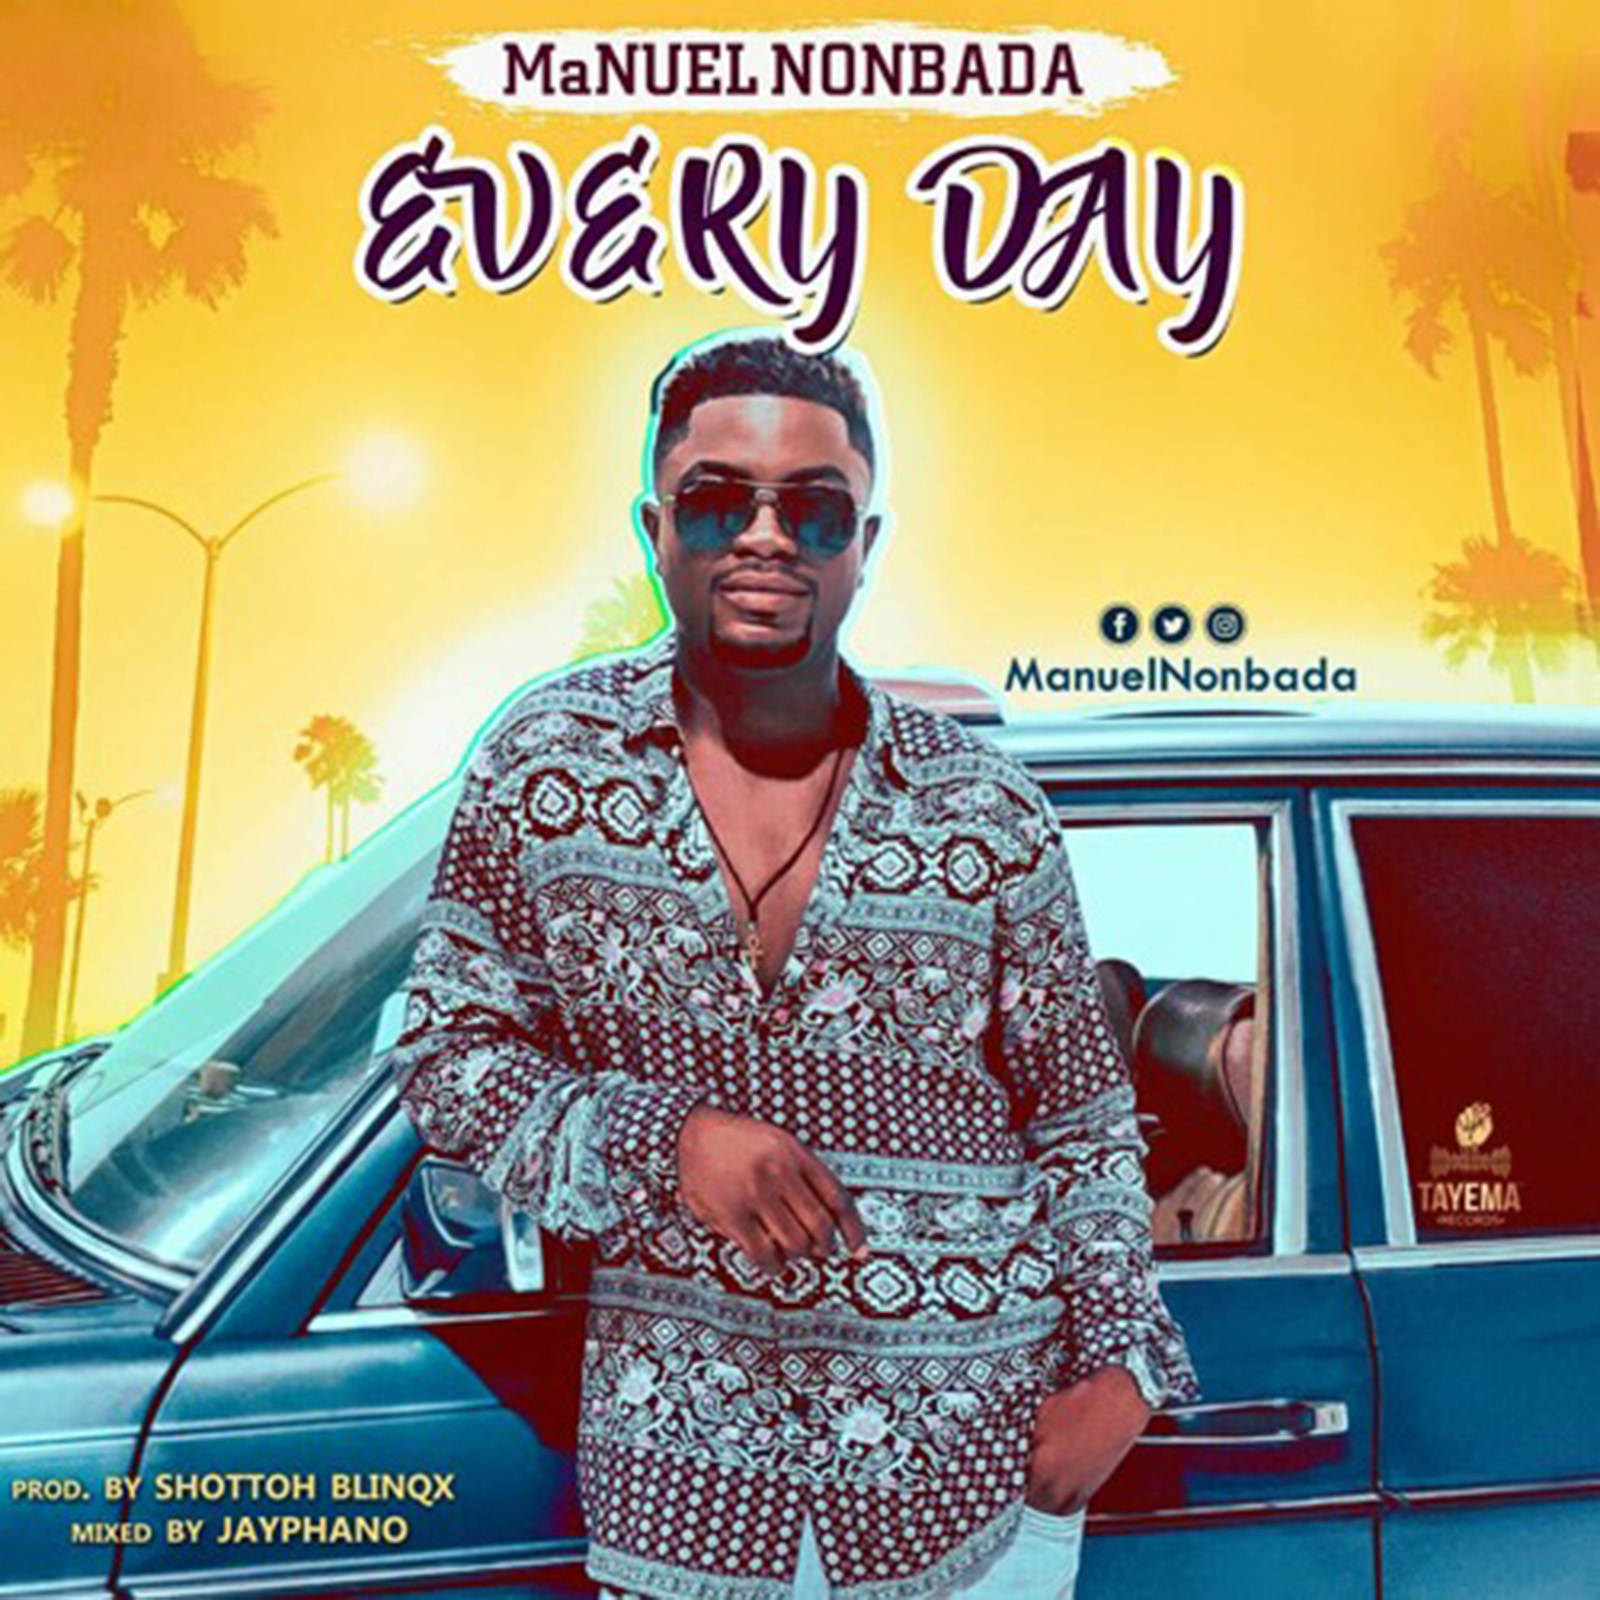 Every Day by MaNUEL Nonbada